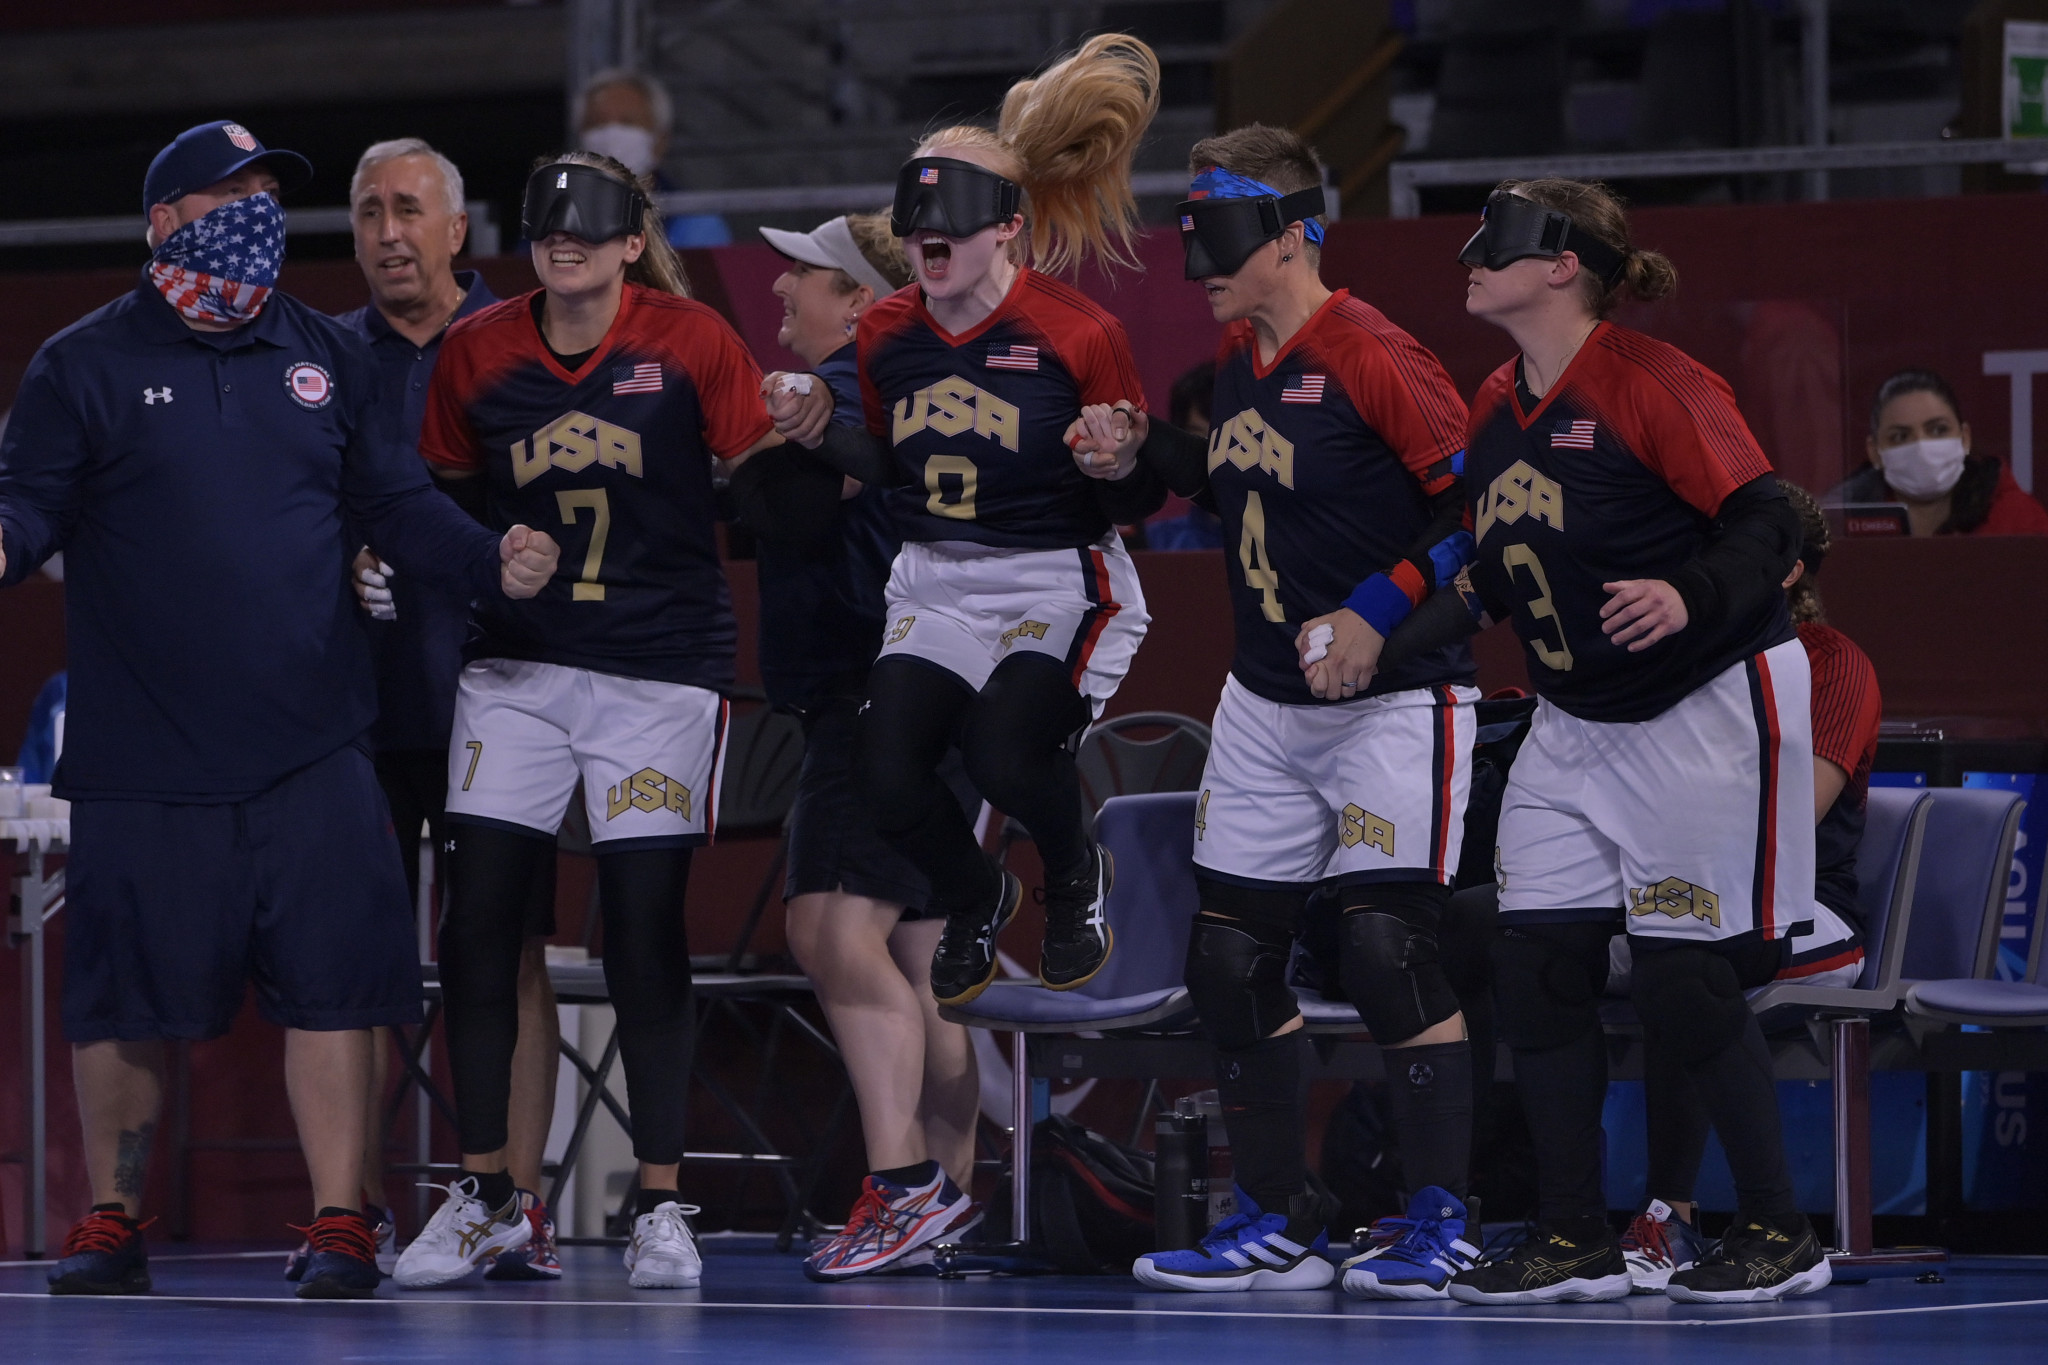 Sharon Gunderman was part of the United States women's goalball team coaching set-up across six Paralympics ©Getty Images